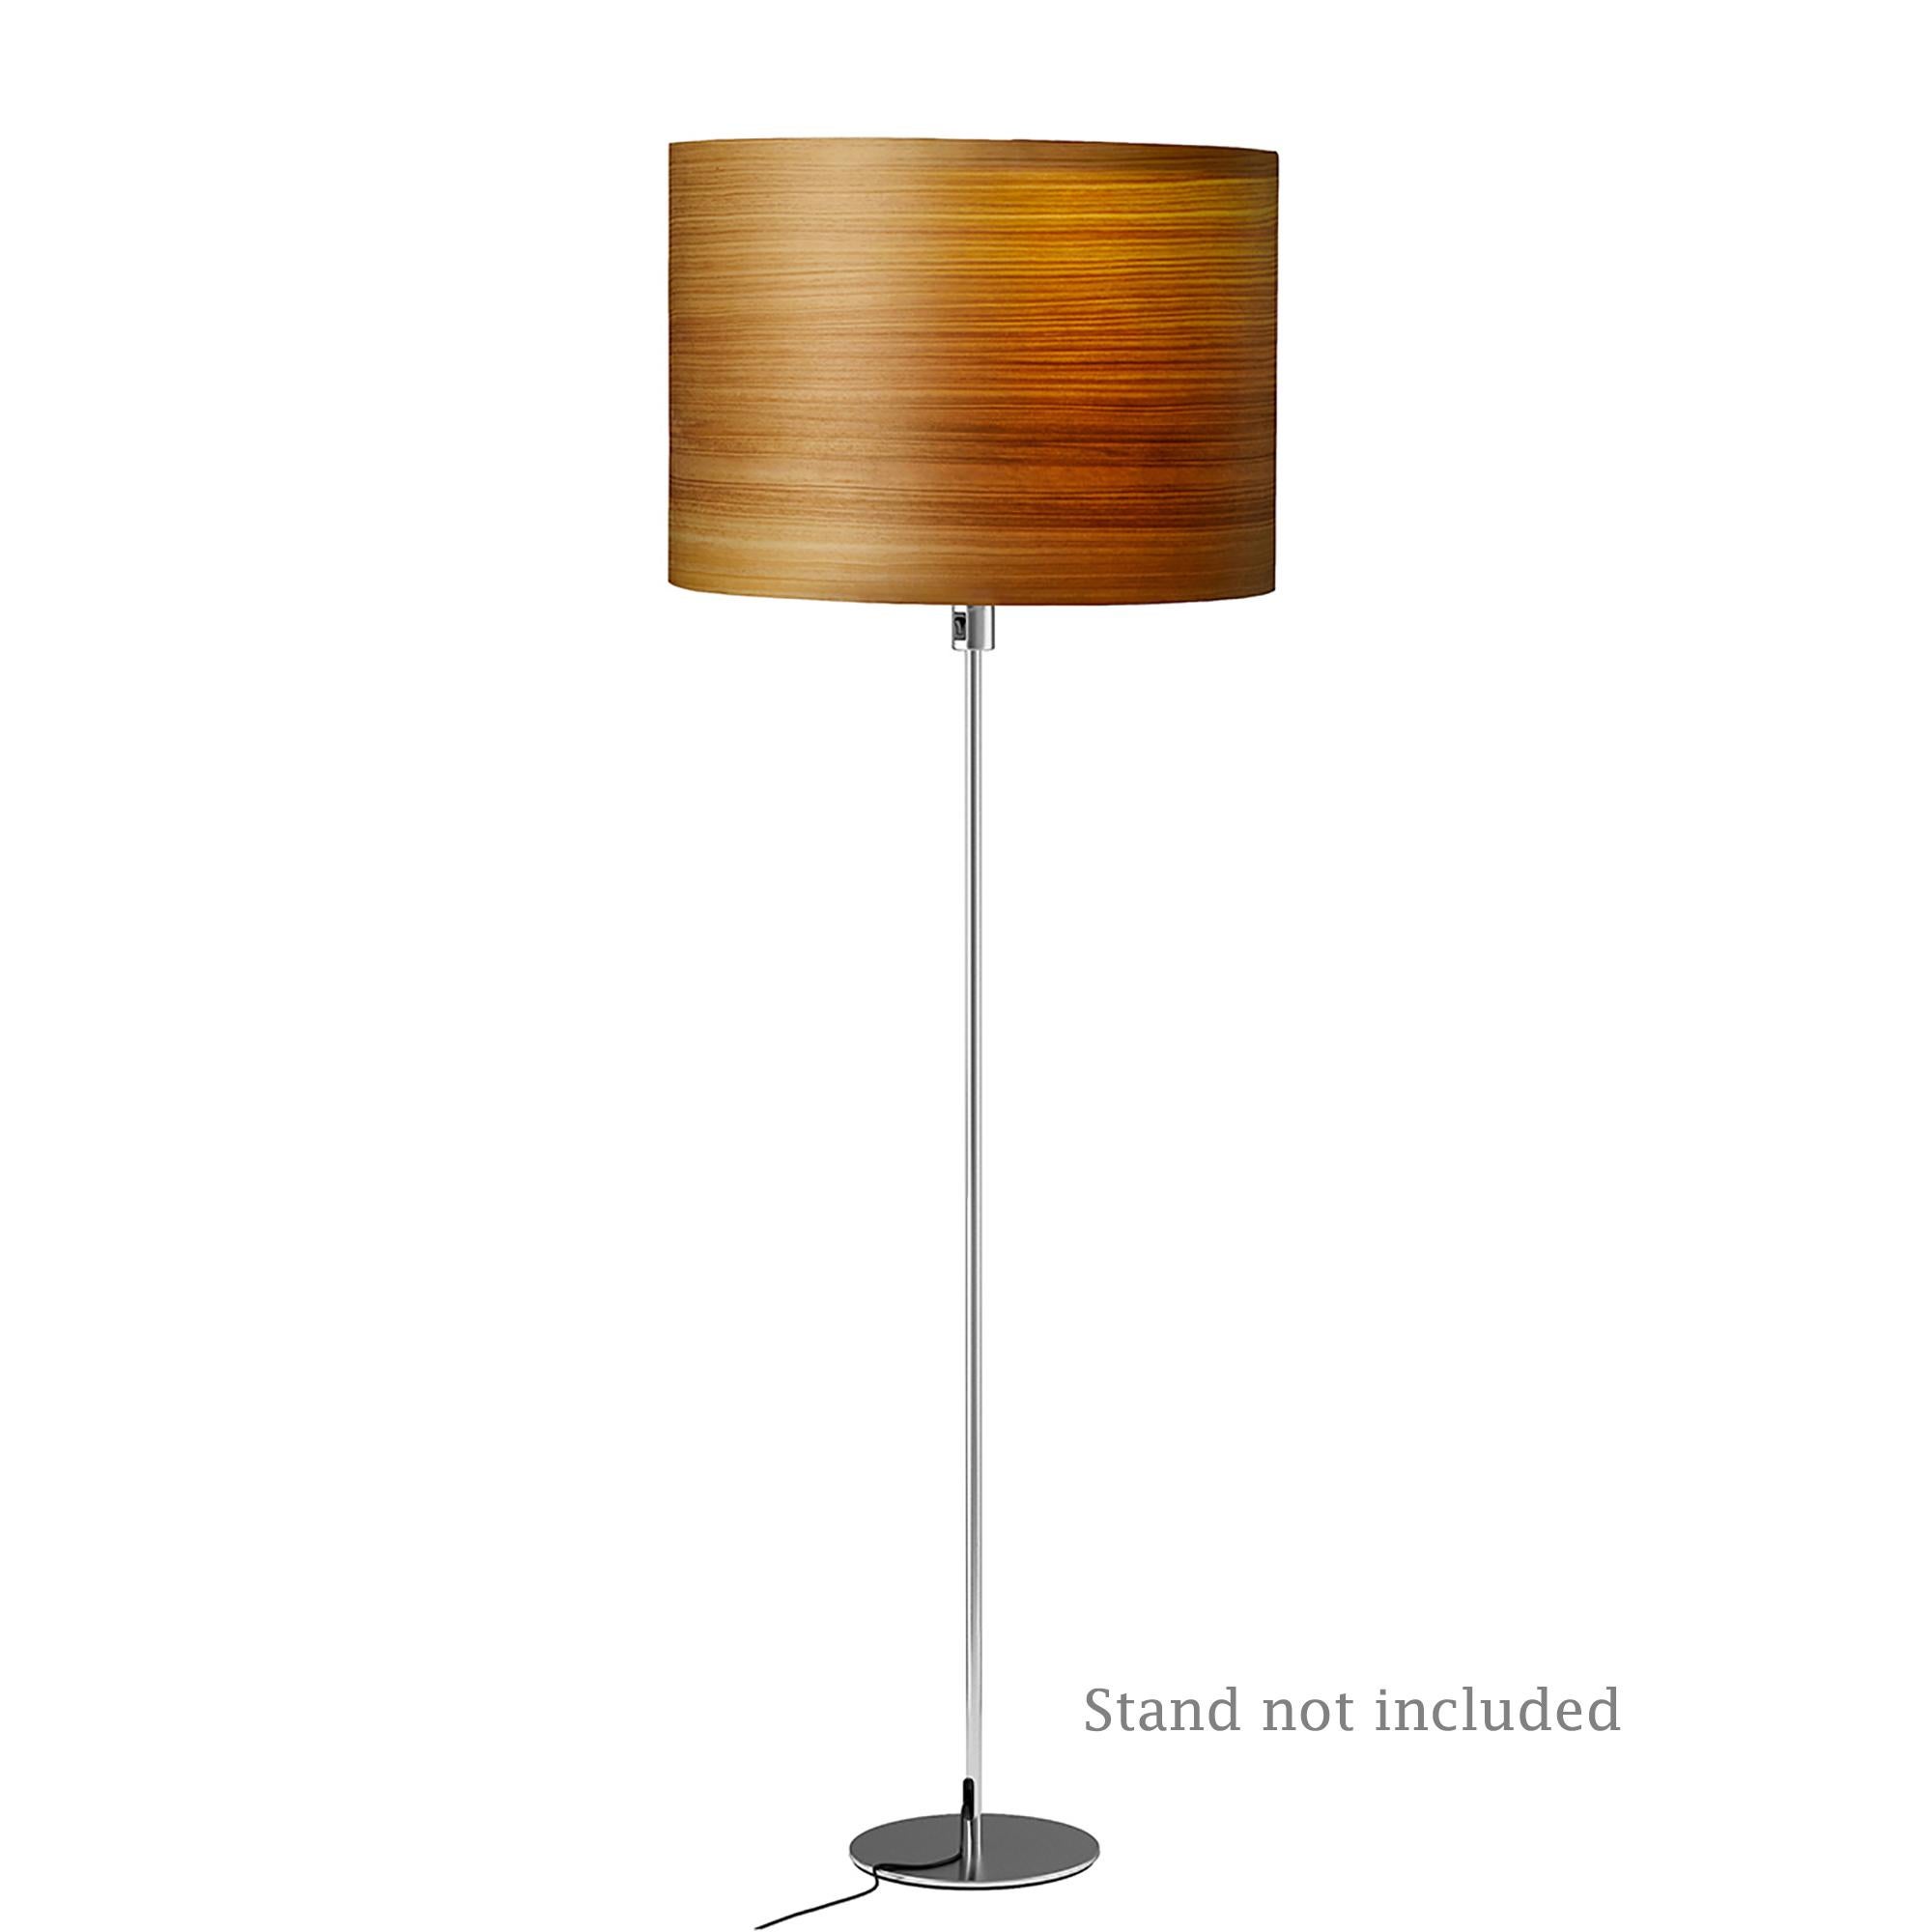 DEXTER is a large wood veneer lampshade. This Organic Modern look is a contemporary statement for an office, living room, or entryway. This Limited-Edition piece is made with cypress wood. This rare wood veneer is in limited supply. A natural